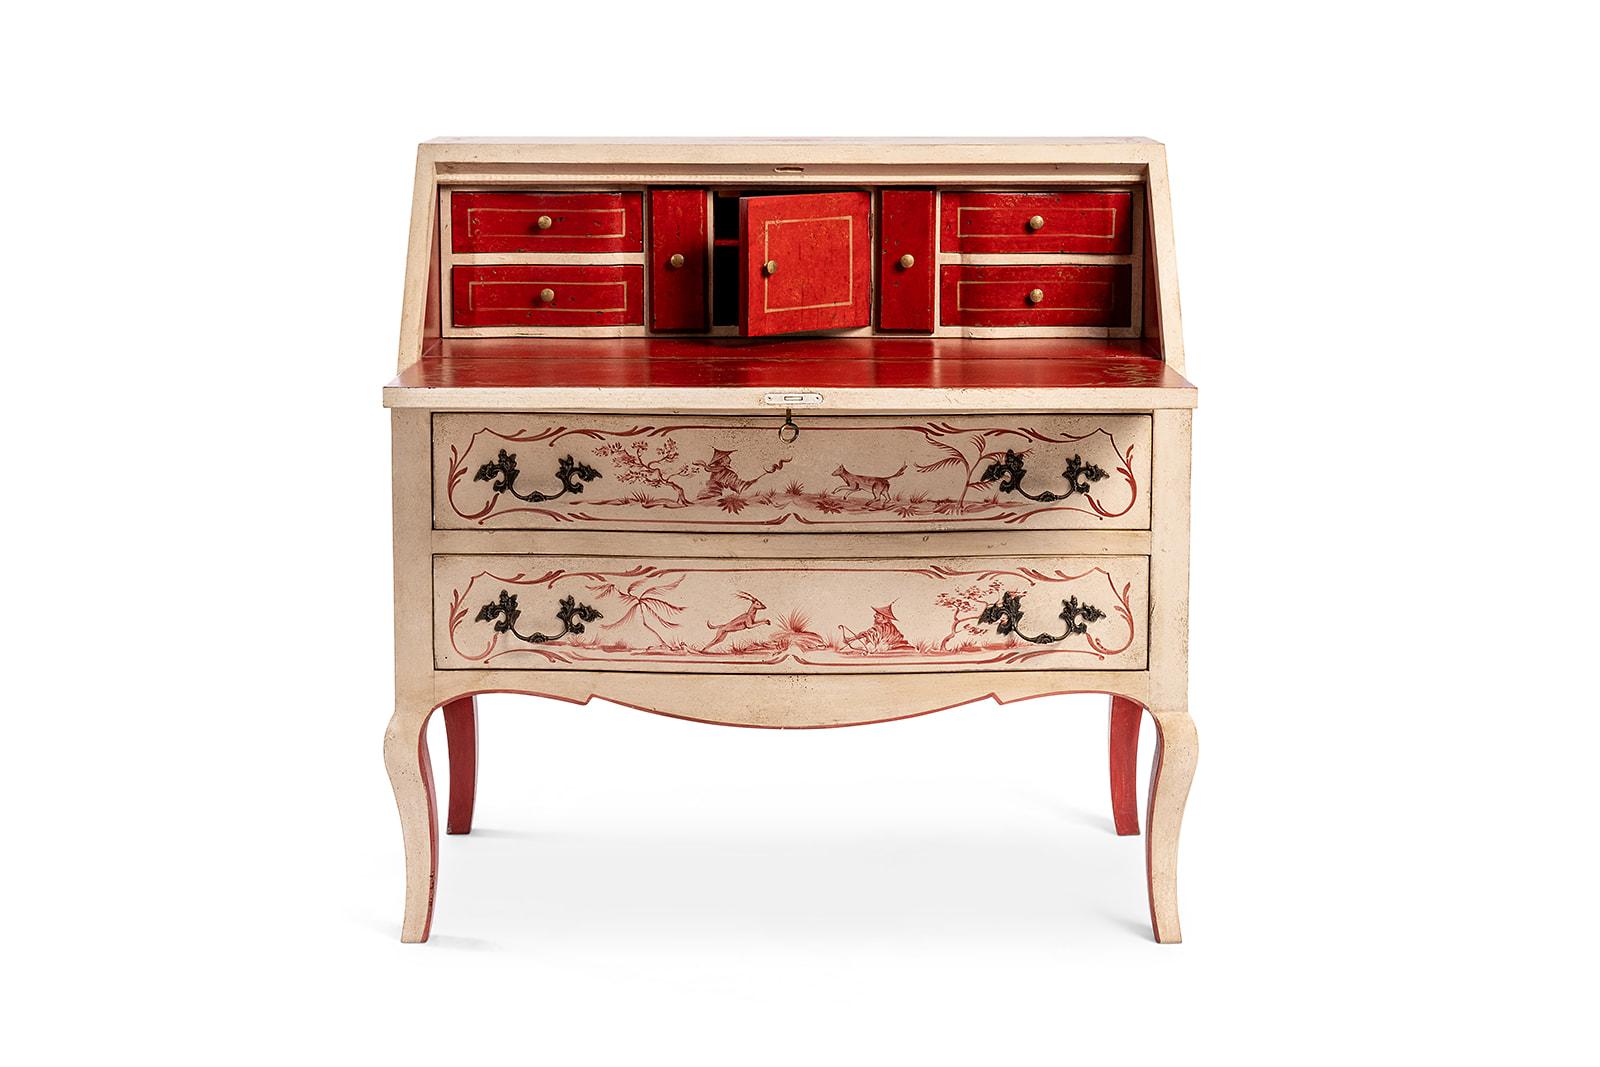 From our Hand-Painted Furniture Collection, we are pleased to introduce you to our Doge Bureau. 
This Porte Italia’s elegant and timeless bureau will infuse style in any room, with its rich red detailed chinoiserie in contrast with the light taupe